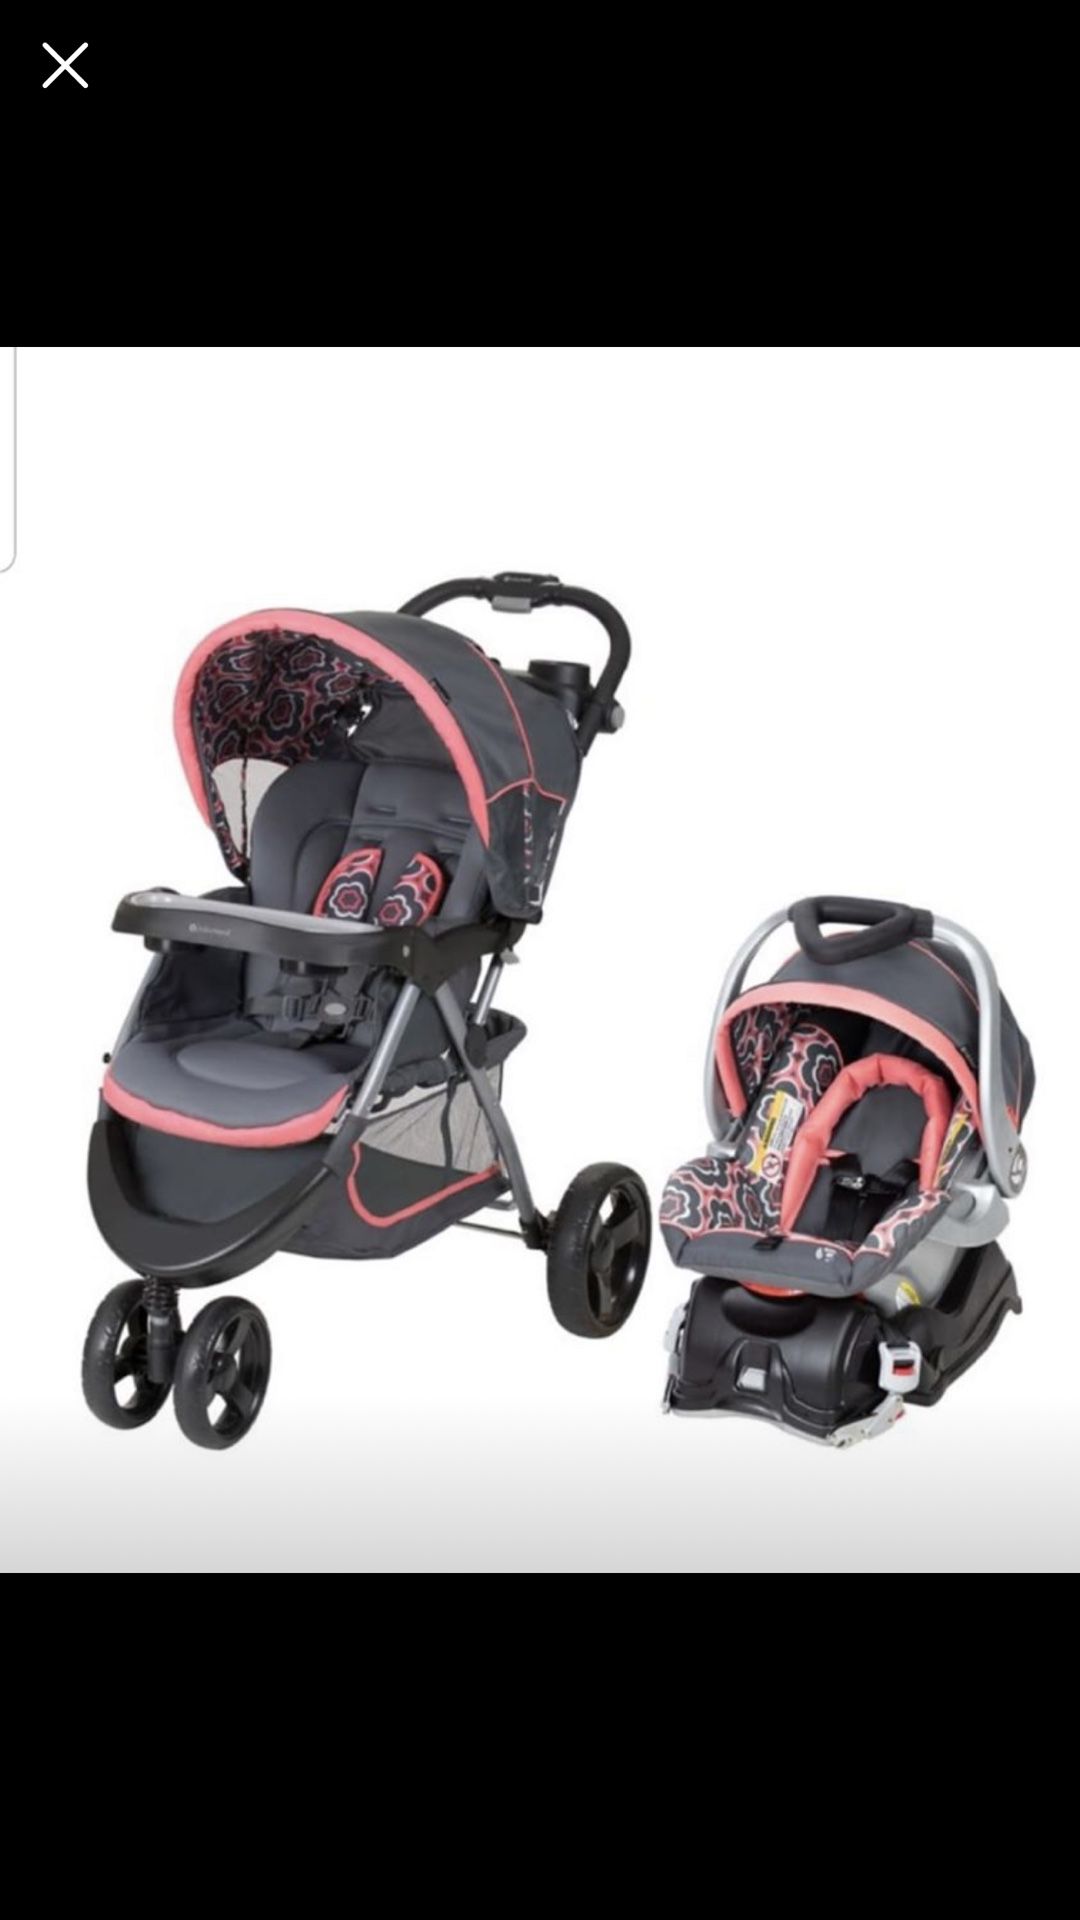 Baby trend stroller and car seat